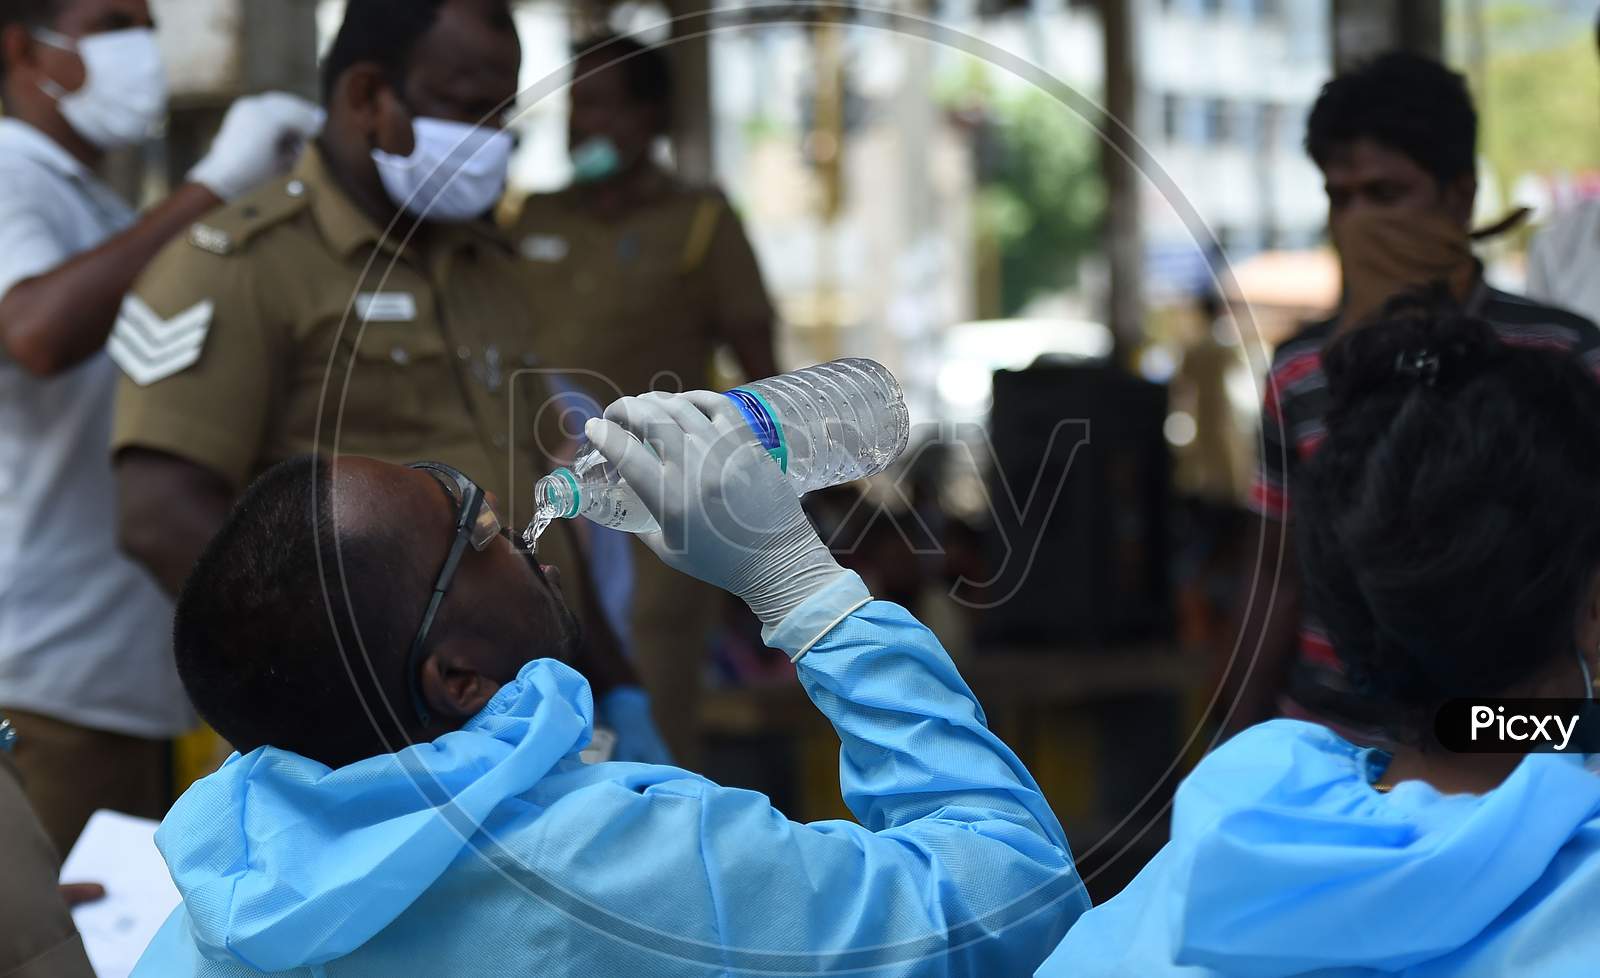  Health Workers Conducting The Thermal Screening Of Migrant Labourers From Bihar During The Ongoing Nationwide Lockdown In The Wake Of Coronavirus Pandemic, In Chennai